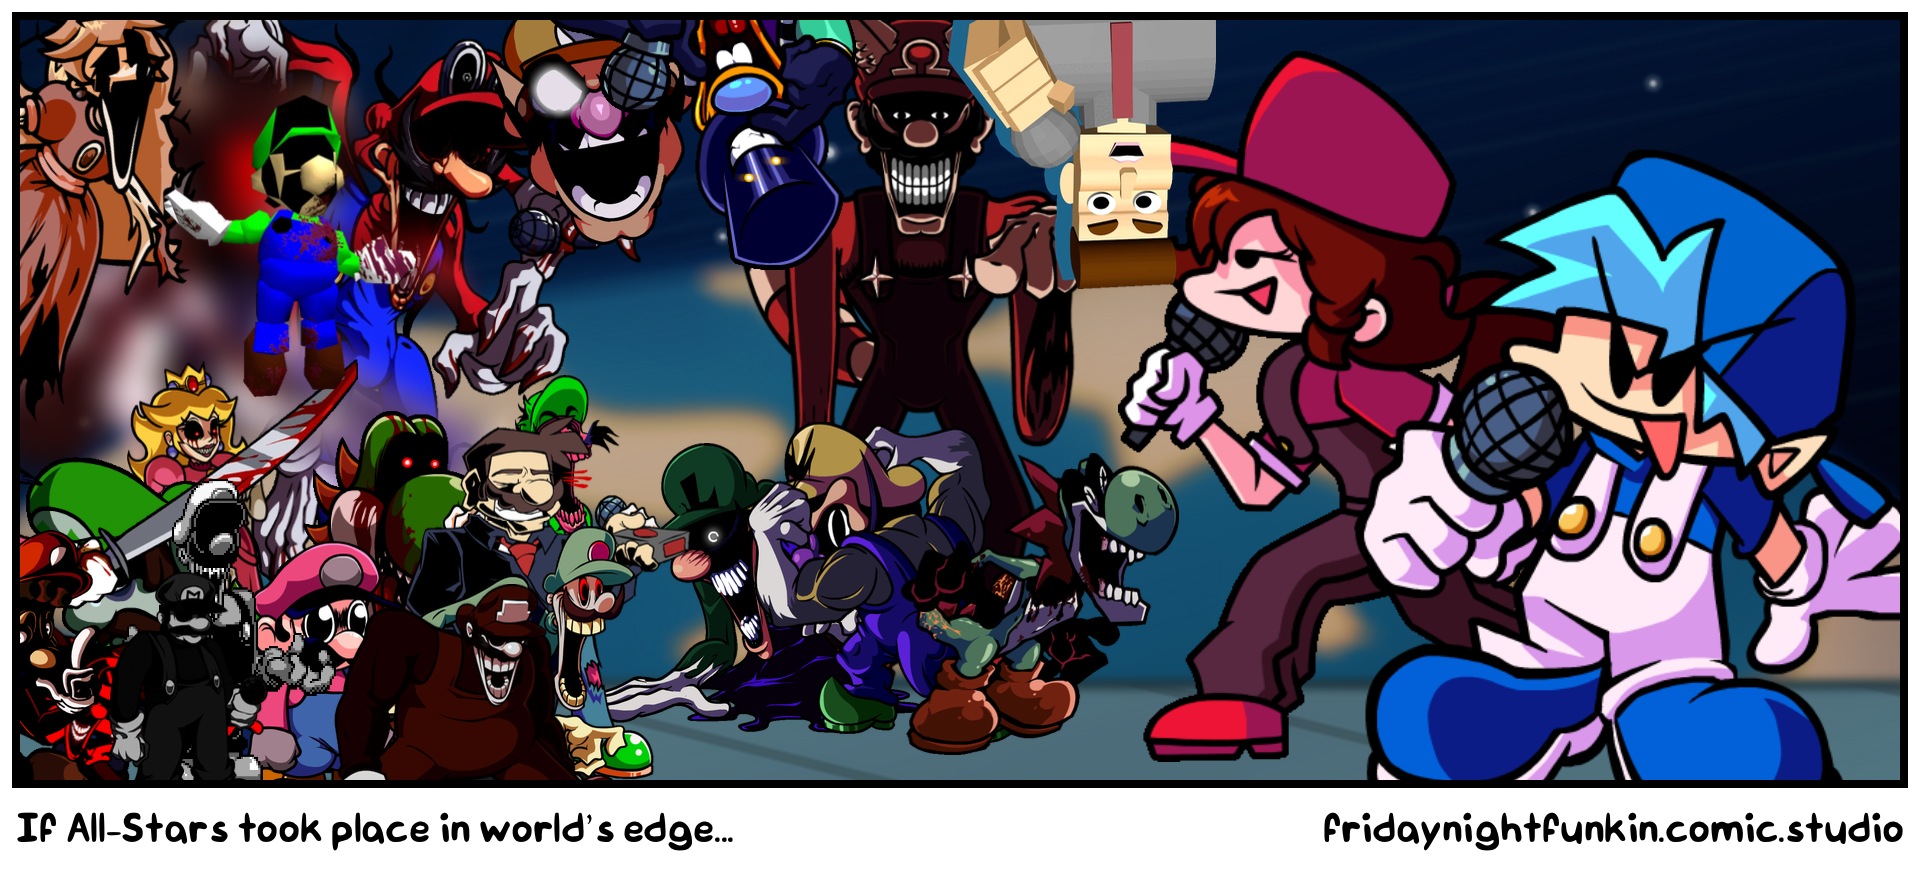 If All-Stars took place in world’s edge...